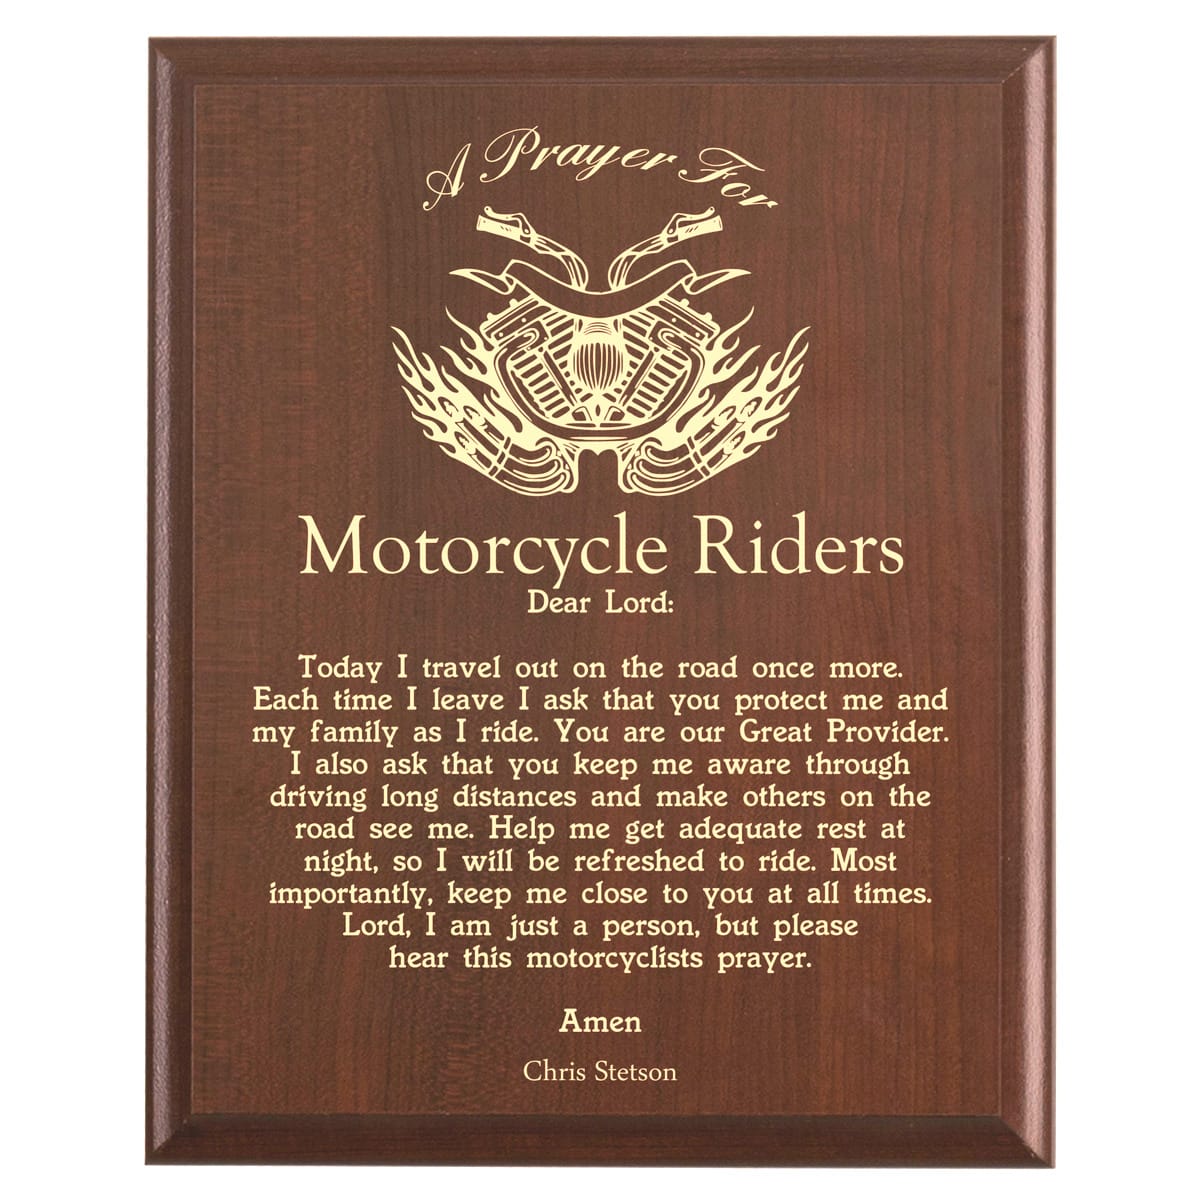 Plaque photo: Motorcycle Rider Prayer Plaque design with free personalization. Wood style finish with customized text.